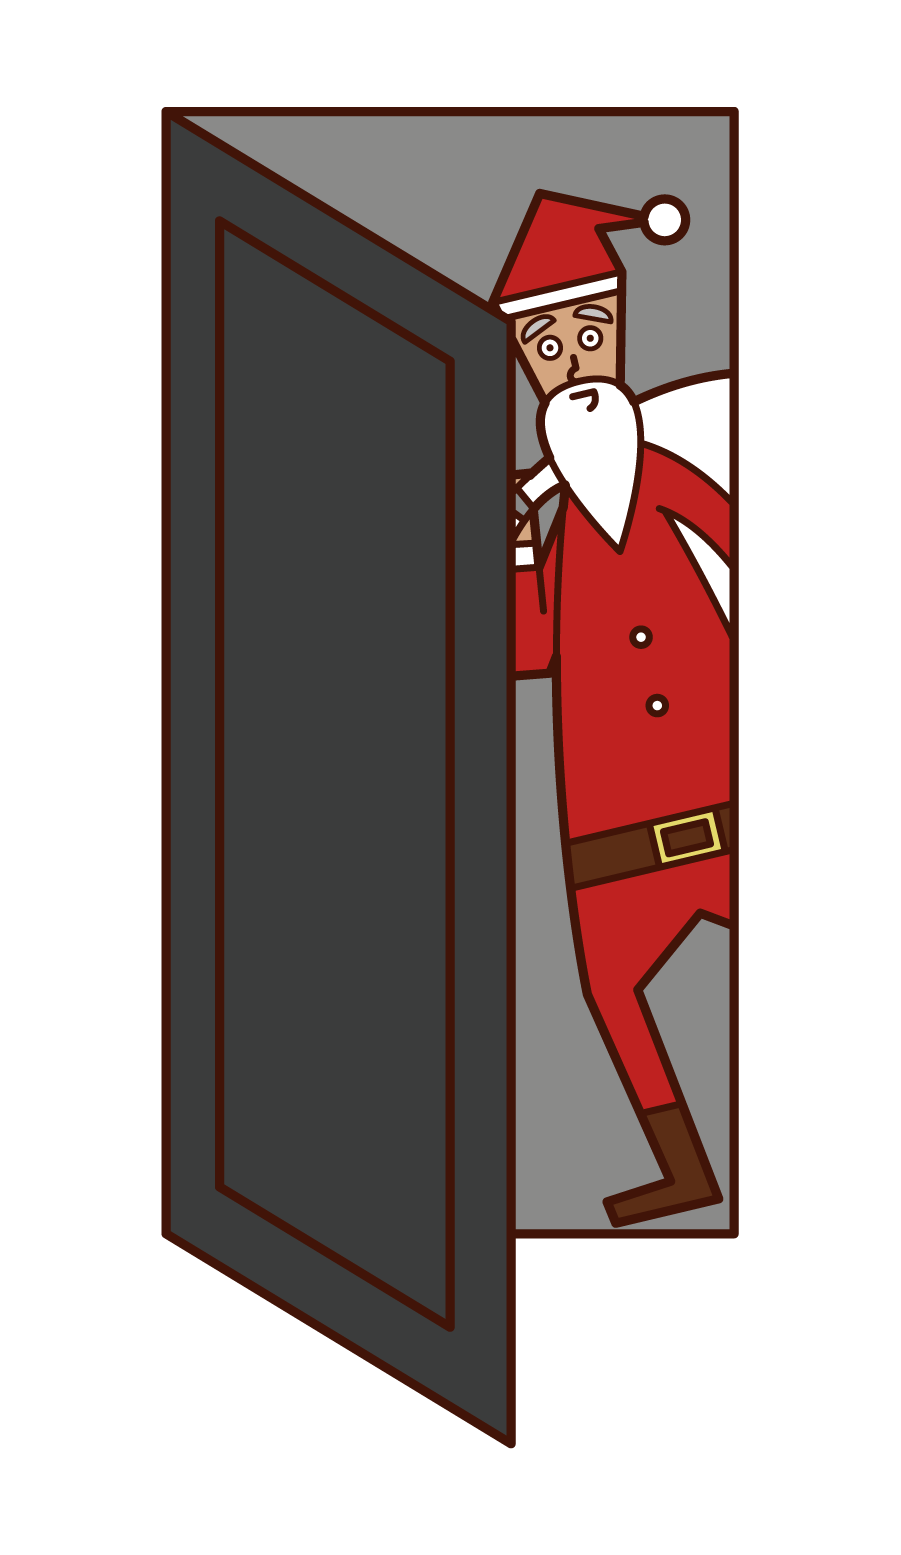 Illustration of Santa Claus (man) sneaking into the room